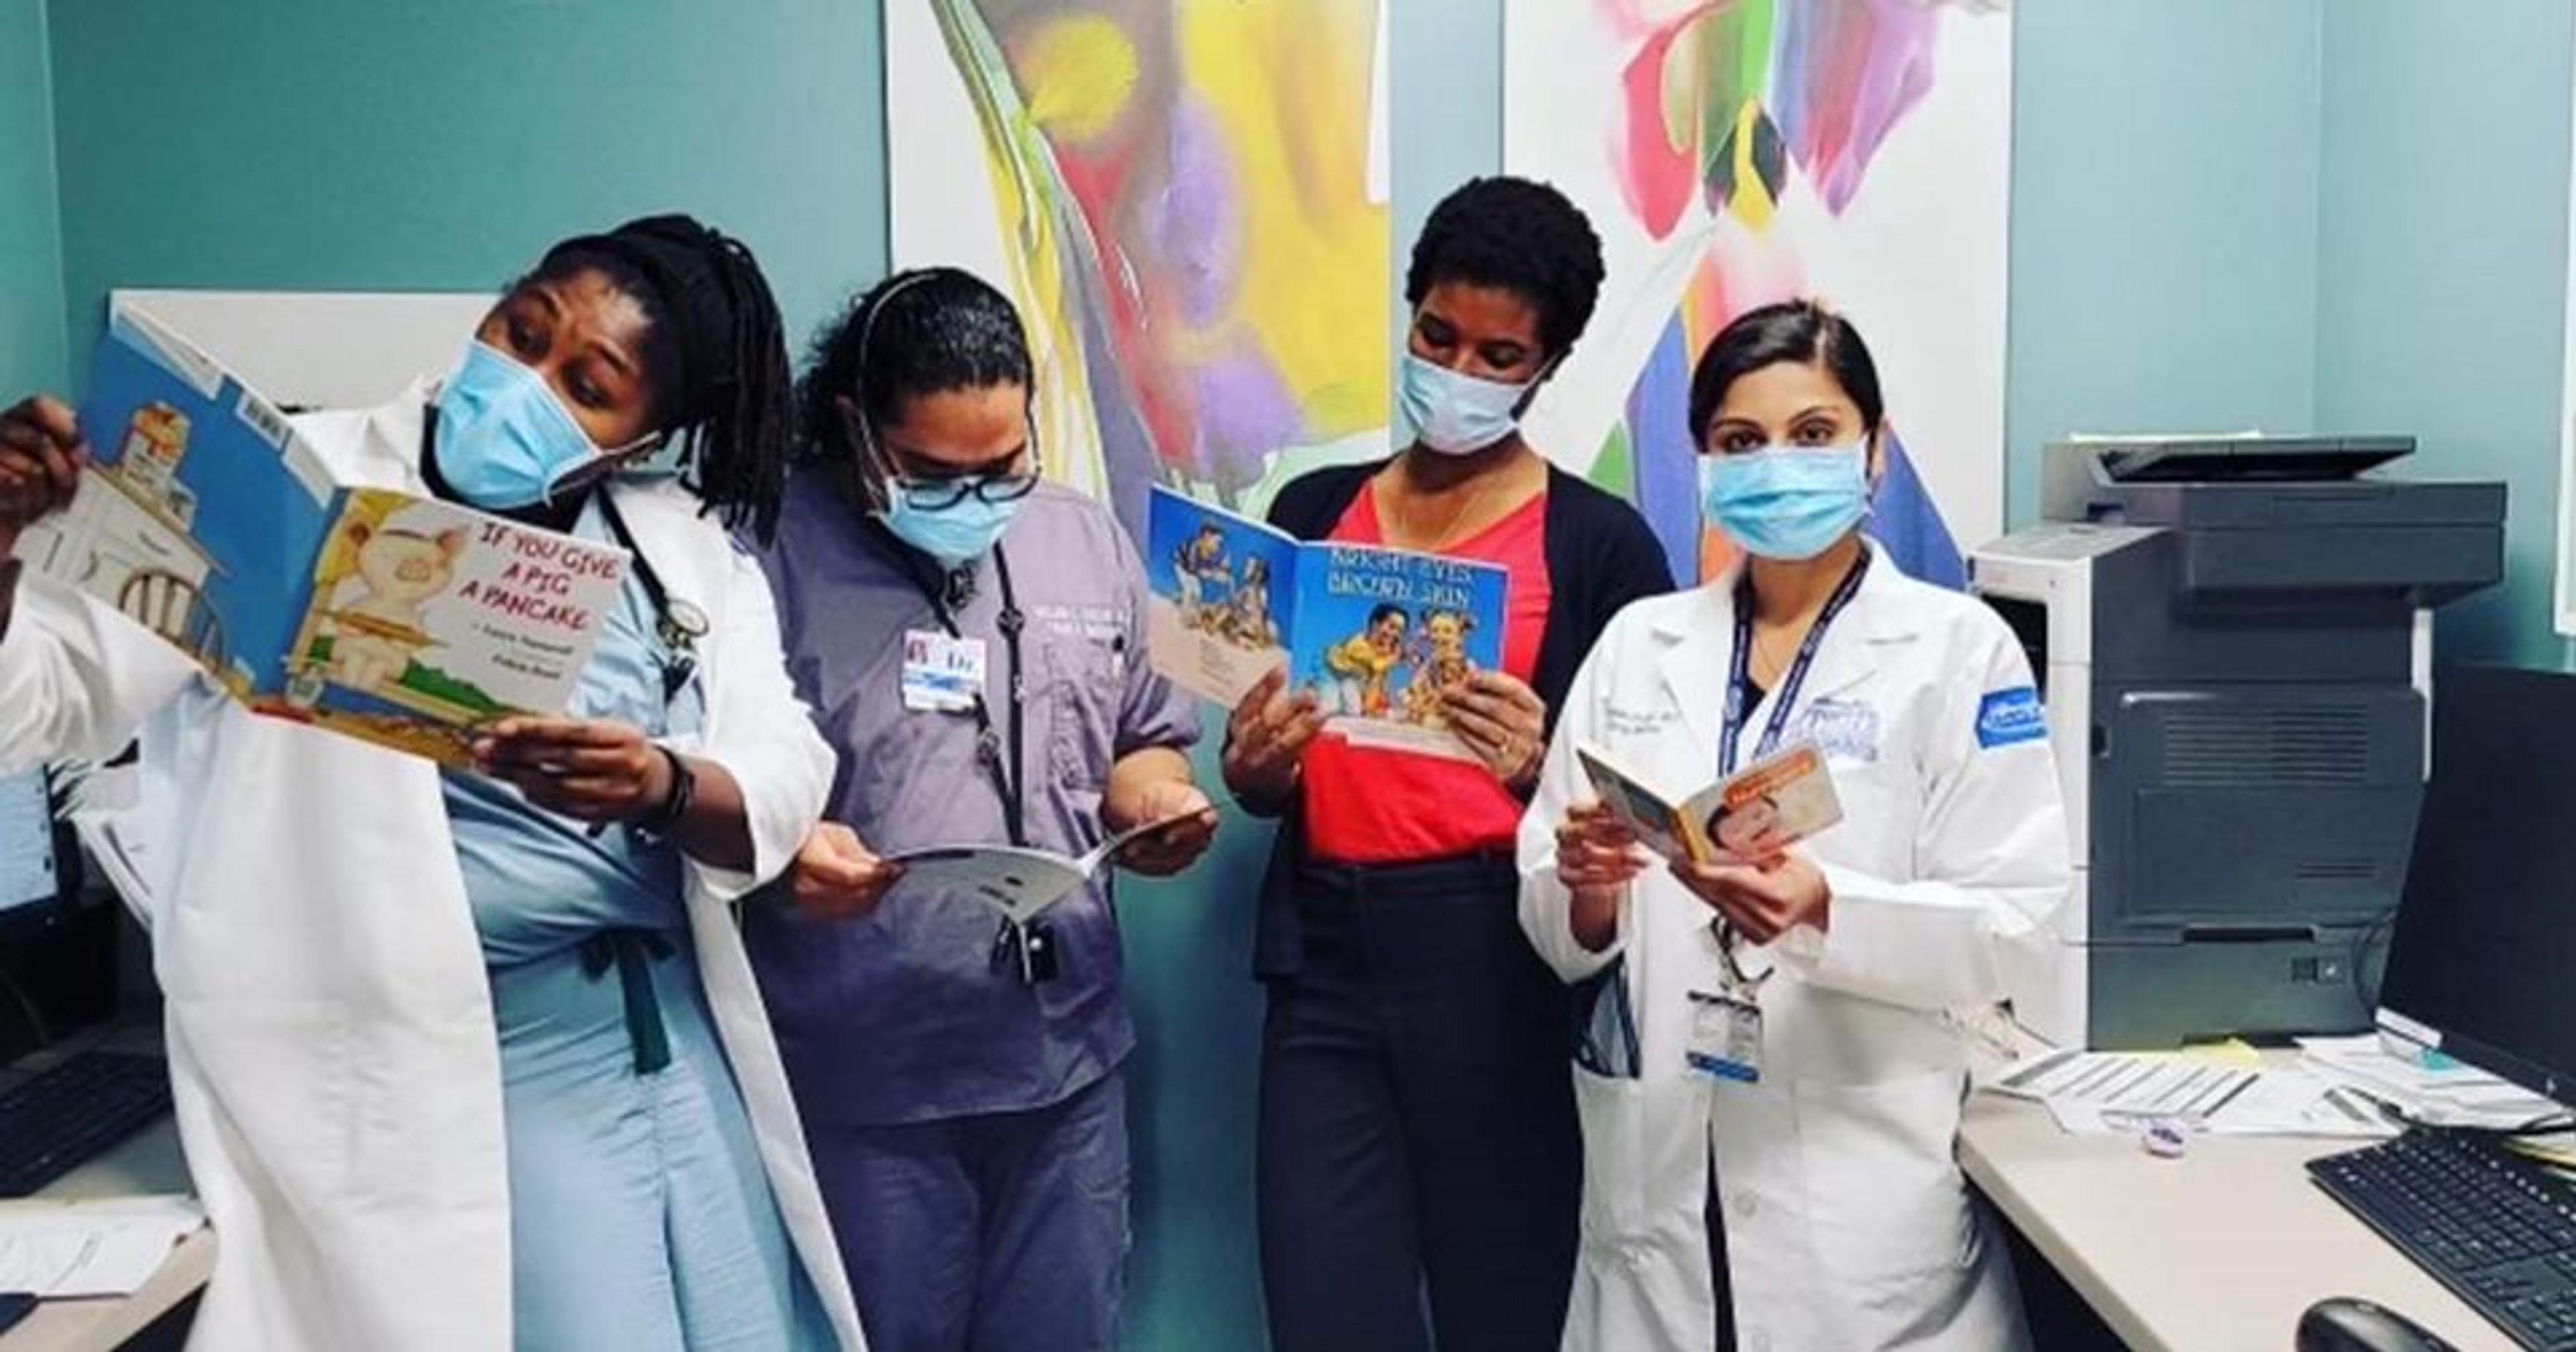 Doctors at Henry Ford Health pose for a photo by reading children's books.